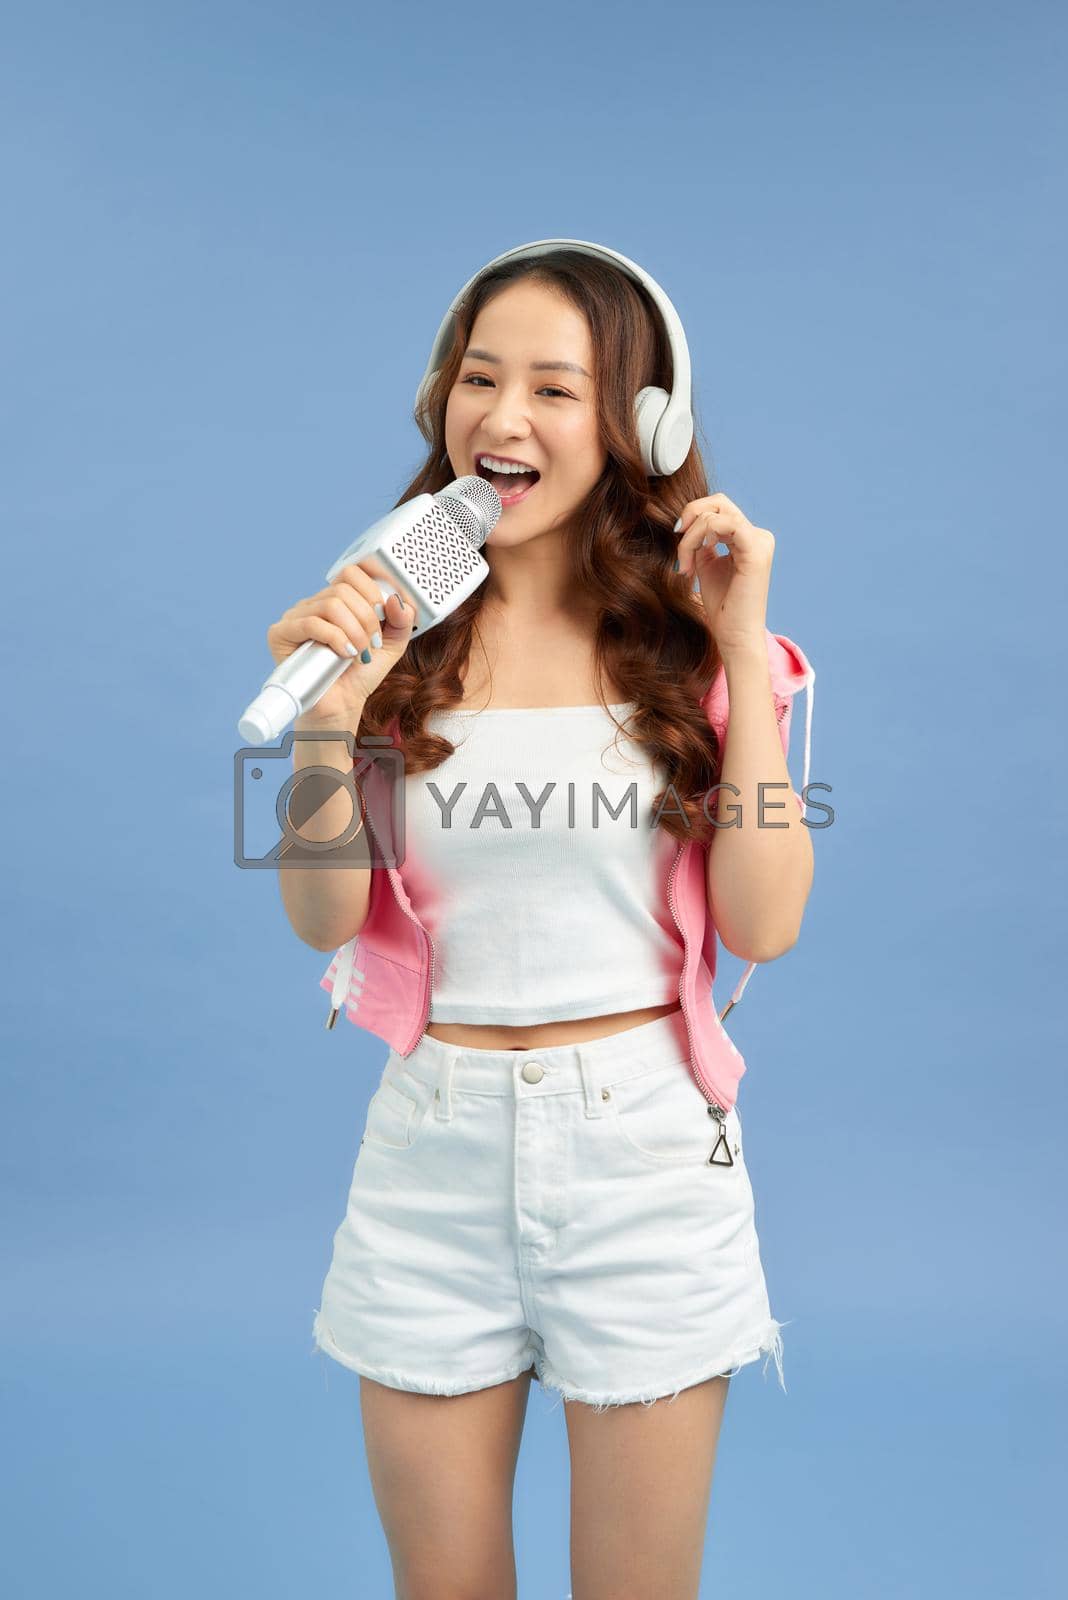 Royalty free image of Beautiful Asian woman singing karaoke isolated over blue background. by makidotvn